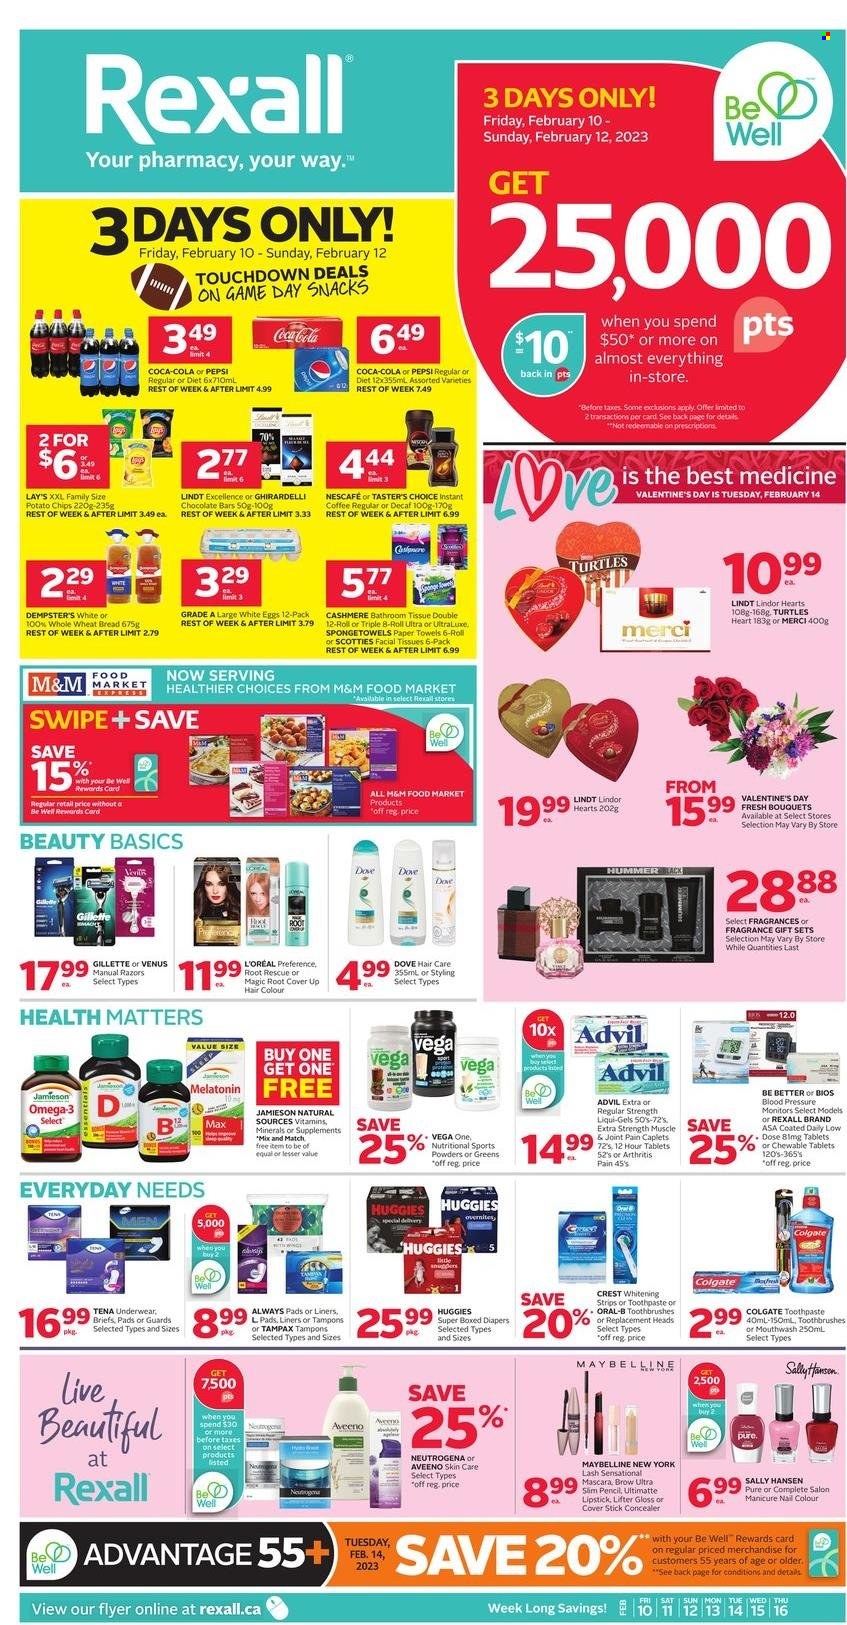 thumbnail - Rexall Flyer - February 10, 2023 - February 16, 2023 - Sales products - wheat bread, eggs, strips, Dove, snack, Merci, Ghirardelli, chocolate bar, potato chips, chips, Lay’s, Coca-Cola, Pepsi, coffee, instant coffee, nappies, Aveeno, bath tissue, kitchen towels, paper towels, toothpaste, mouthwash, Crest, Always pads, sanitary pads, tampons, facial tissues, Gillette, L’Oréal, hair color, fragrance, Venus, manicure, corrector, lipstick, mascara, Maybelline, hook, pot, pencil, Melatonin, Omega-3, Advil Rapid, Low Dose, pressure monitor, Colgate, Neutrogena, Sally Hansen, Tampax, Huggies, Oral-B, Lindt, Lindor, Nescafé, M&M's. Page 1.